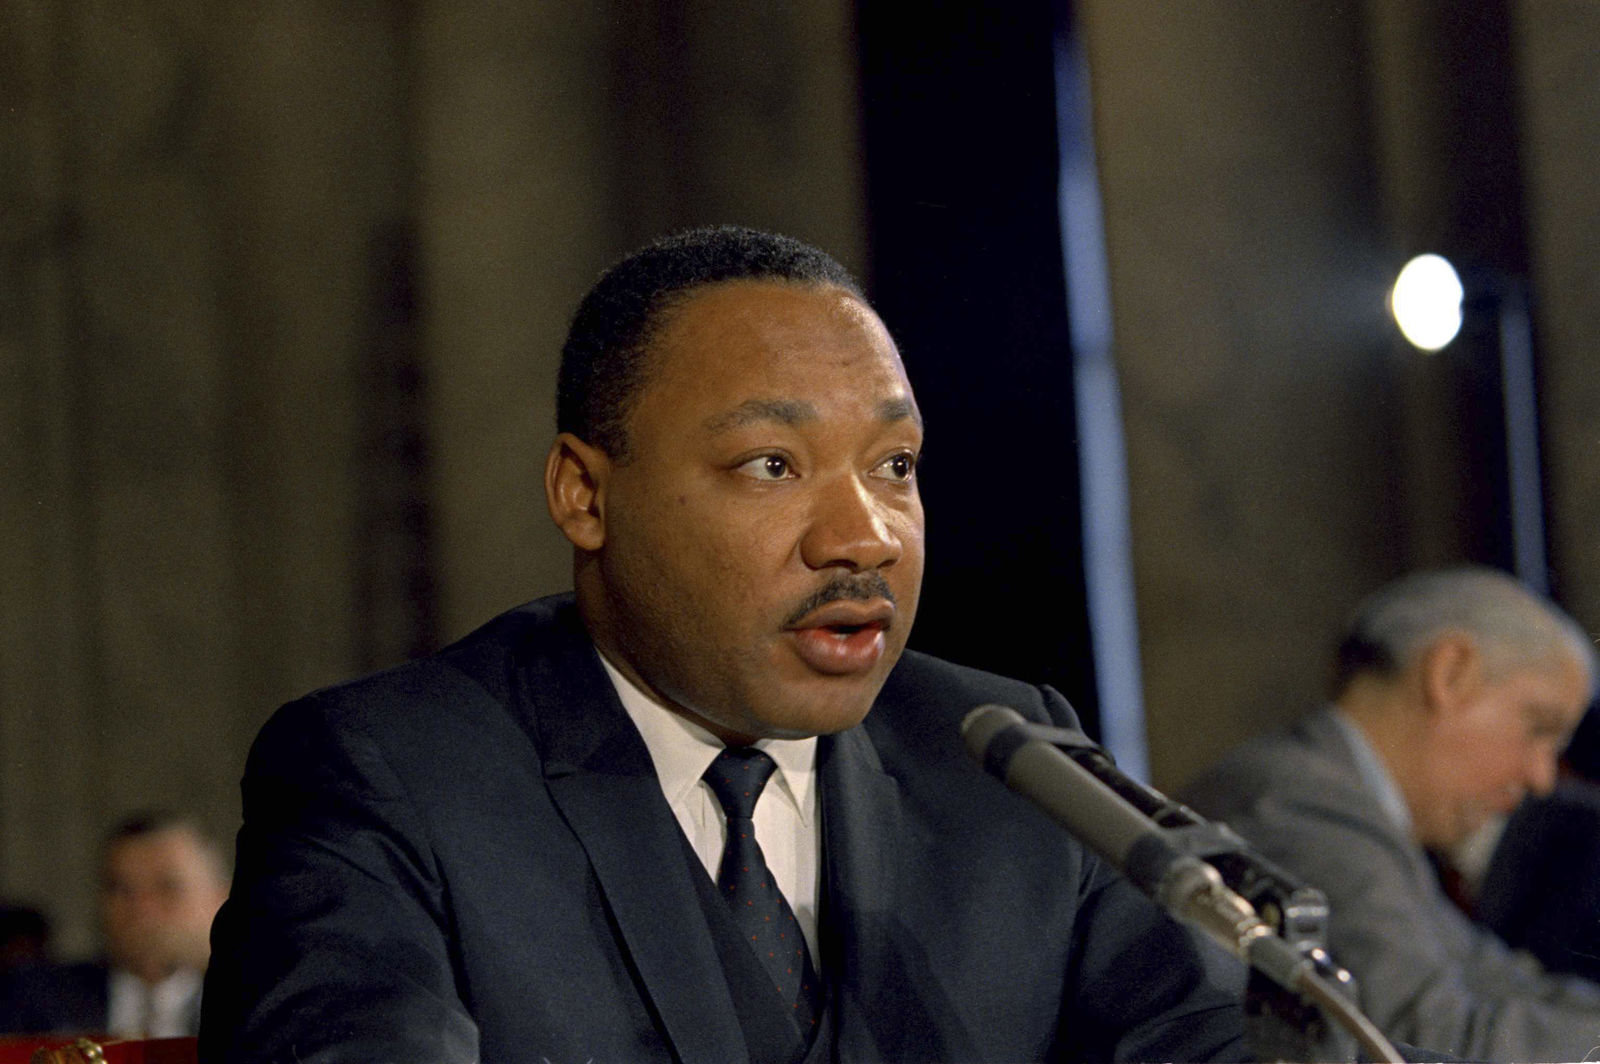 Dr. Martin Luther King civil rights leader testifying before the Senate Government Operations subcommittee, December 15, 1966. (AP Photo)